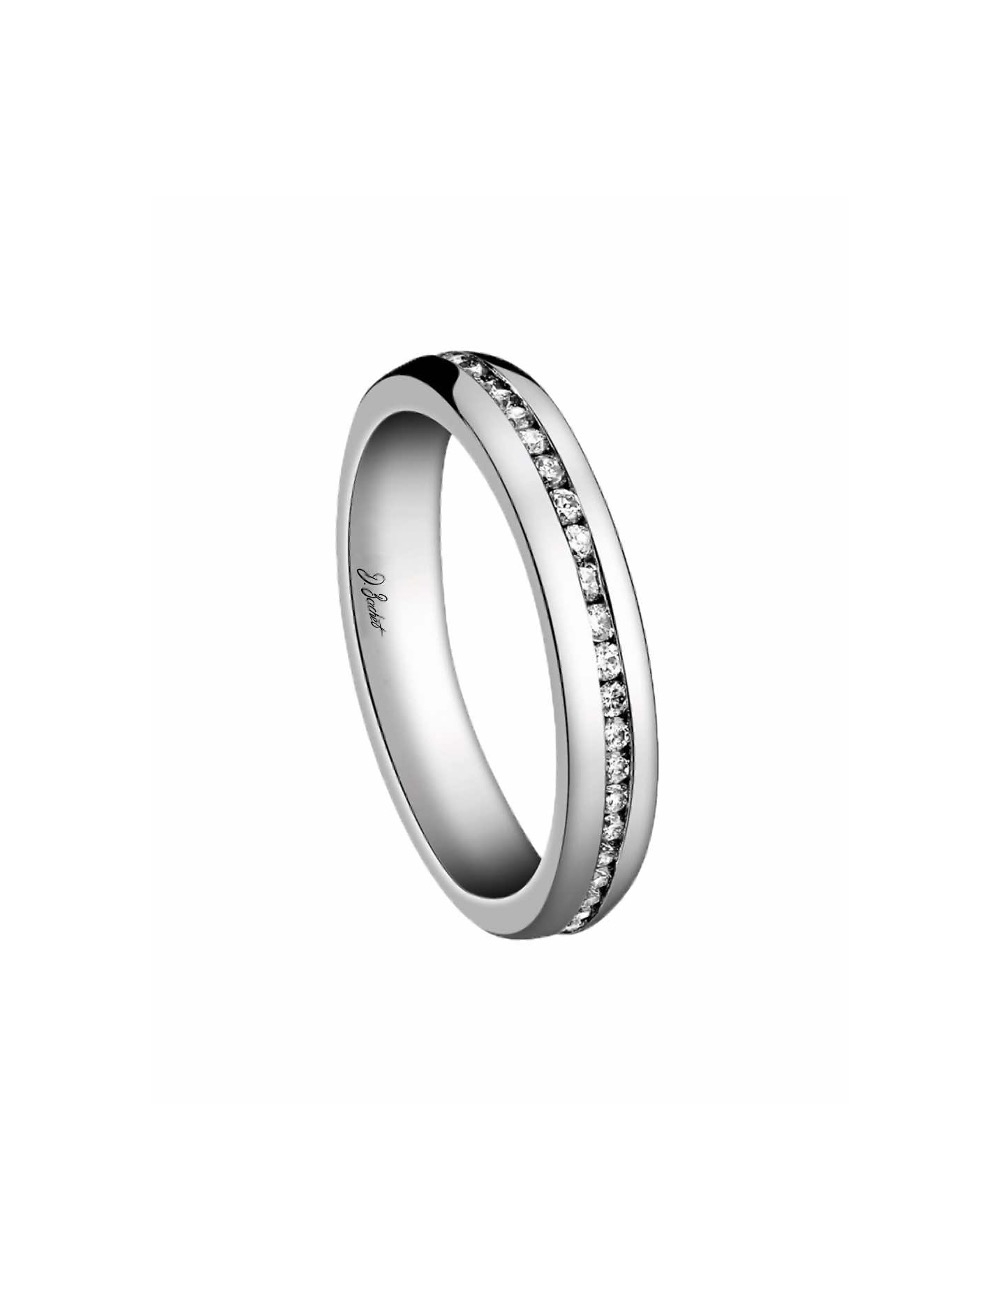 An eternity wedding ring for women in platinum and set with channel-set white diamonds